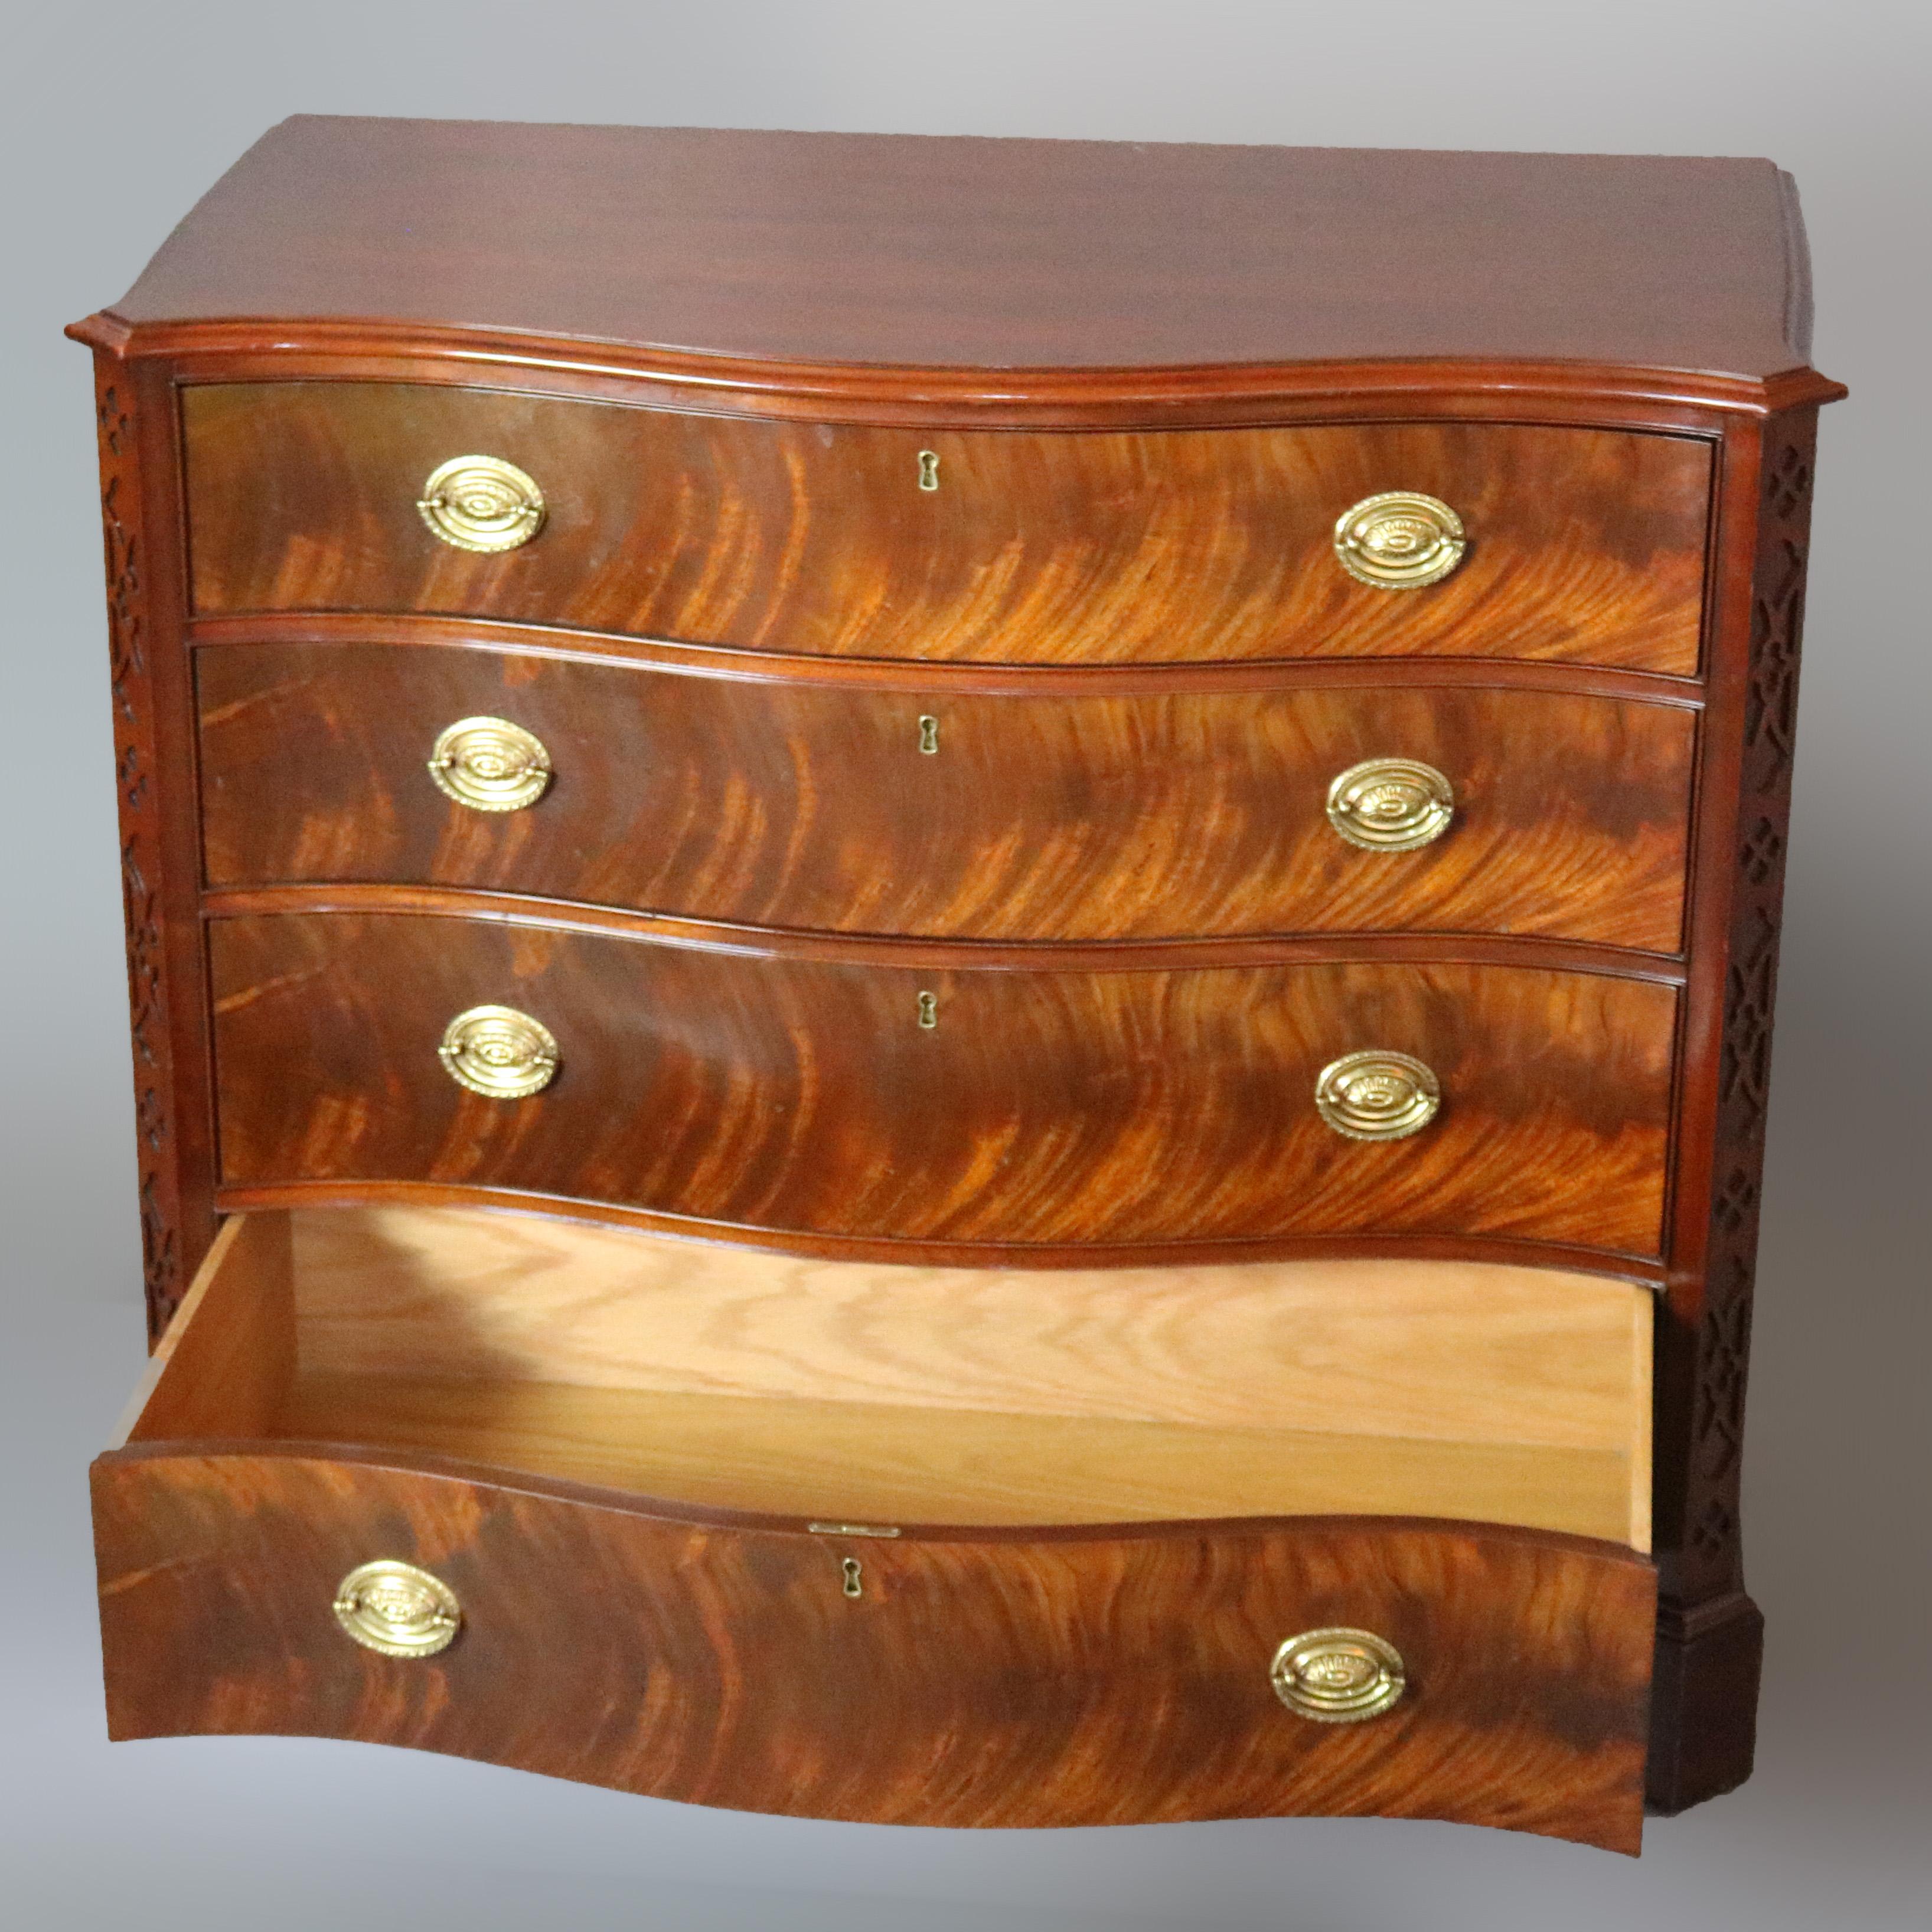 An antique English Georgian III style limited edition chest of drawers by Hickory Chair of the James River collection offers deeply striated flame mahogany construction with swell front form, raised on bracket feet and having cast brass pulls, maker